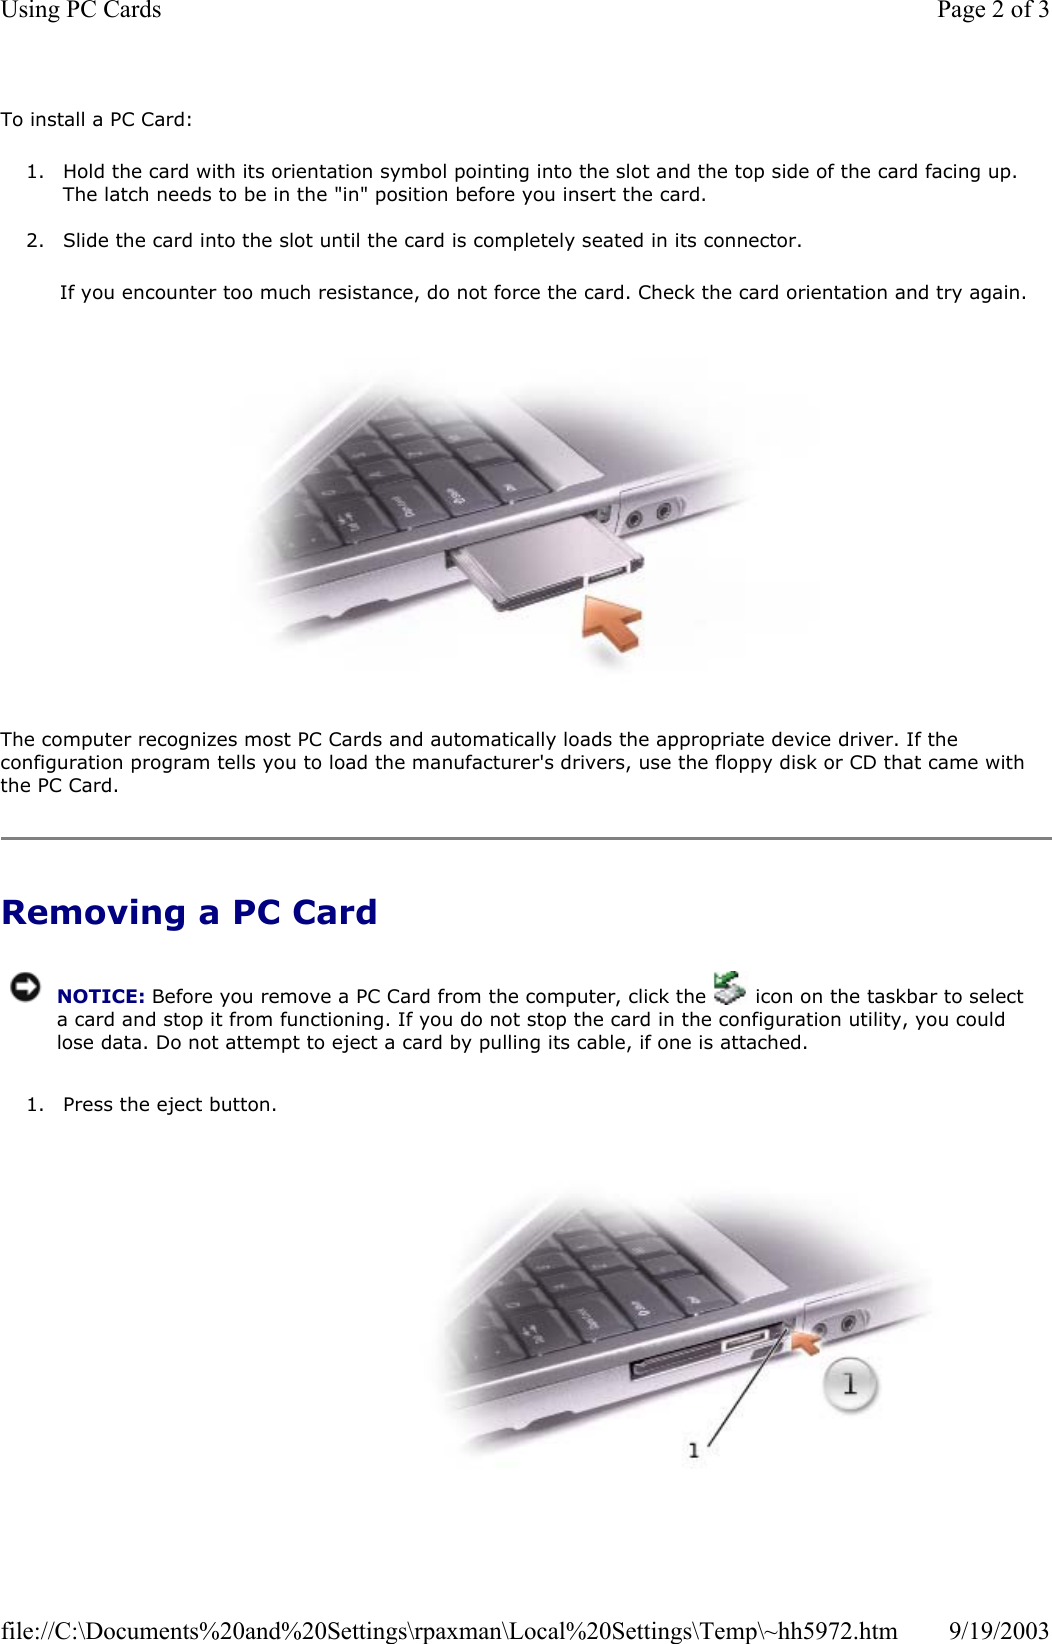 To install a PC Card: 1. Hold the card with its orientation symbol pointing into the slot and the top side of the card facing up. The latch needs to be in the &quot;in&quot; position before you insert the card.  2. Slide the card into the slot until the card is completely seated in its connector.   If you encounter too much resistance, do not force the card. Check the card orientation and try again.    The computer recognizes most PC Cards and automatically loads the appropriate device driver. If the configuration program tells you to load the manufacturer&apos;s drivers, use the floppy disk or CD that came with the PC Card. Removing a PC Card  1. Press the eject button.  NOTICE: Before you remove a PC Card from the computer, click the   icon on the taskbar to select a card and stop it from functioning. If you do not stop the card in the configuration utility, you could lose data. Do not attempt to eject a card by pulling its cable, if one is attached.Page 2 of 3Using PC Cards9/19/2003file://C:\Documents%20and%20Settings\rpaxman\Local%20Settings\Temp\~hh5972.htm